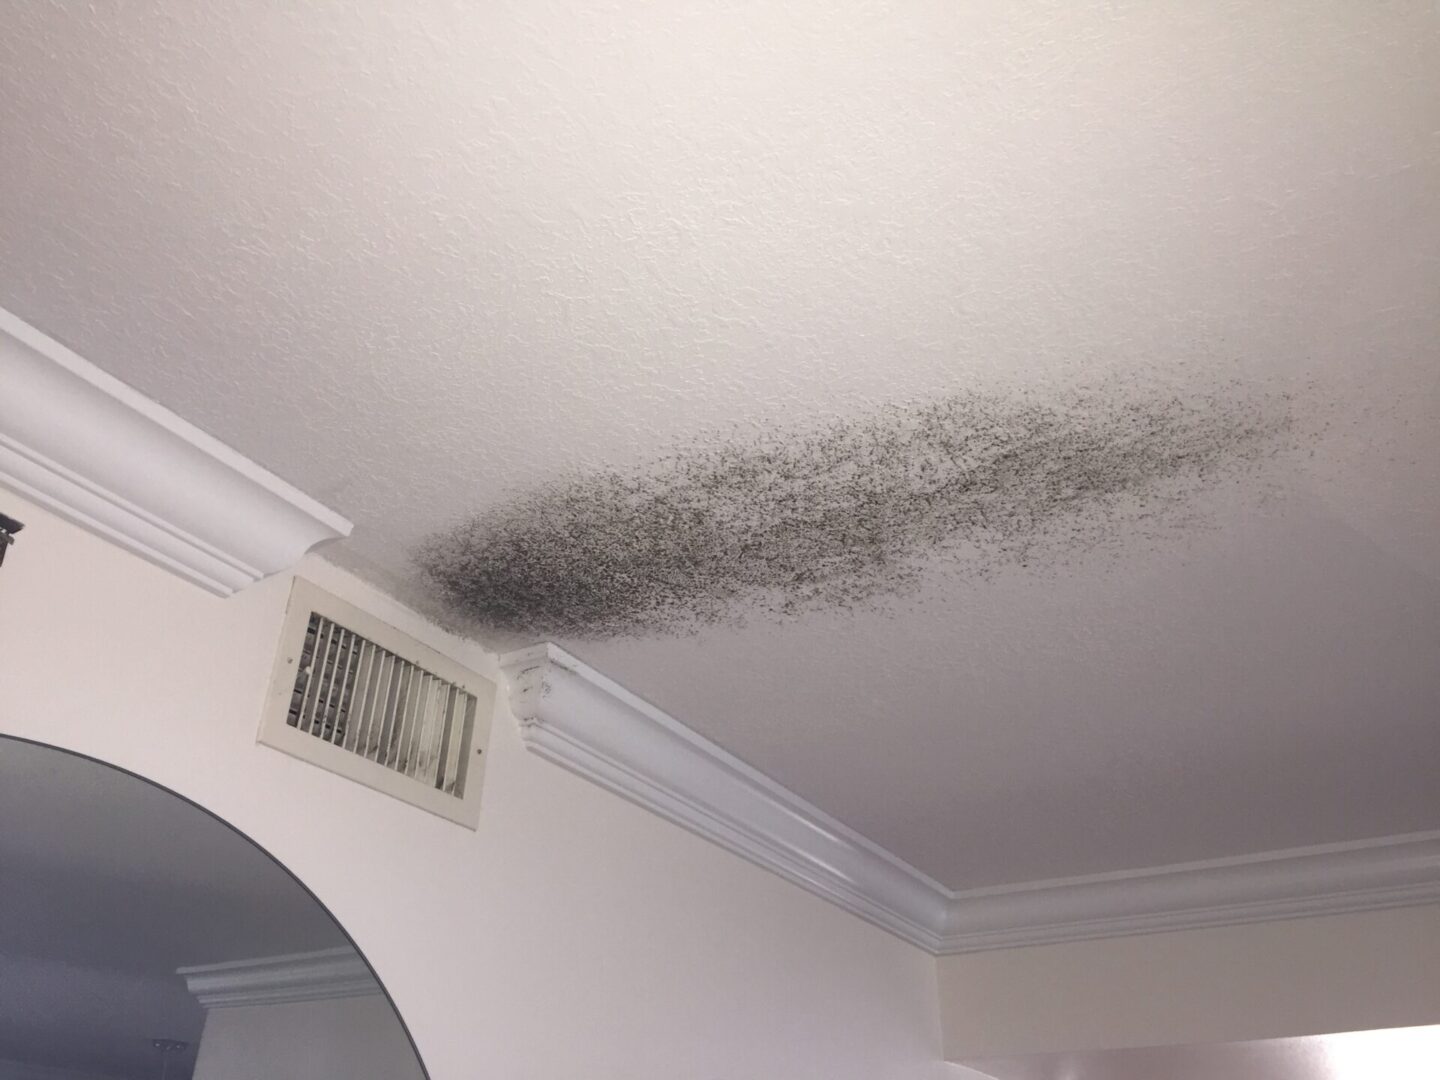 An image of mold discovered during a mold inspection in Jupiter, FL